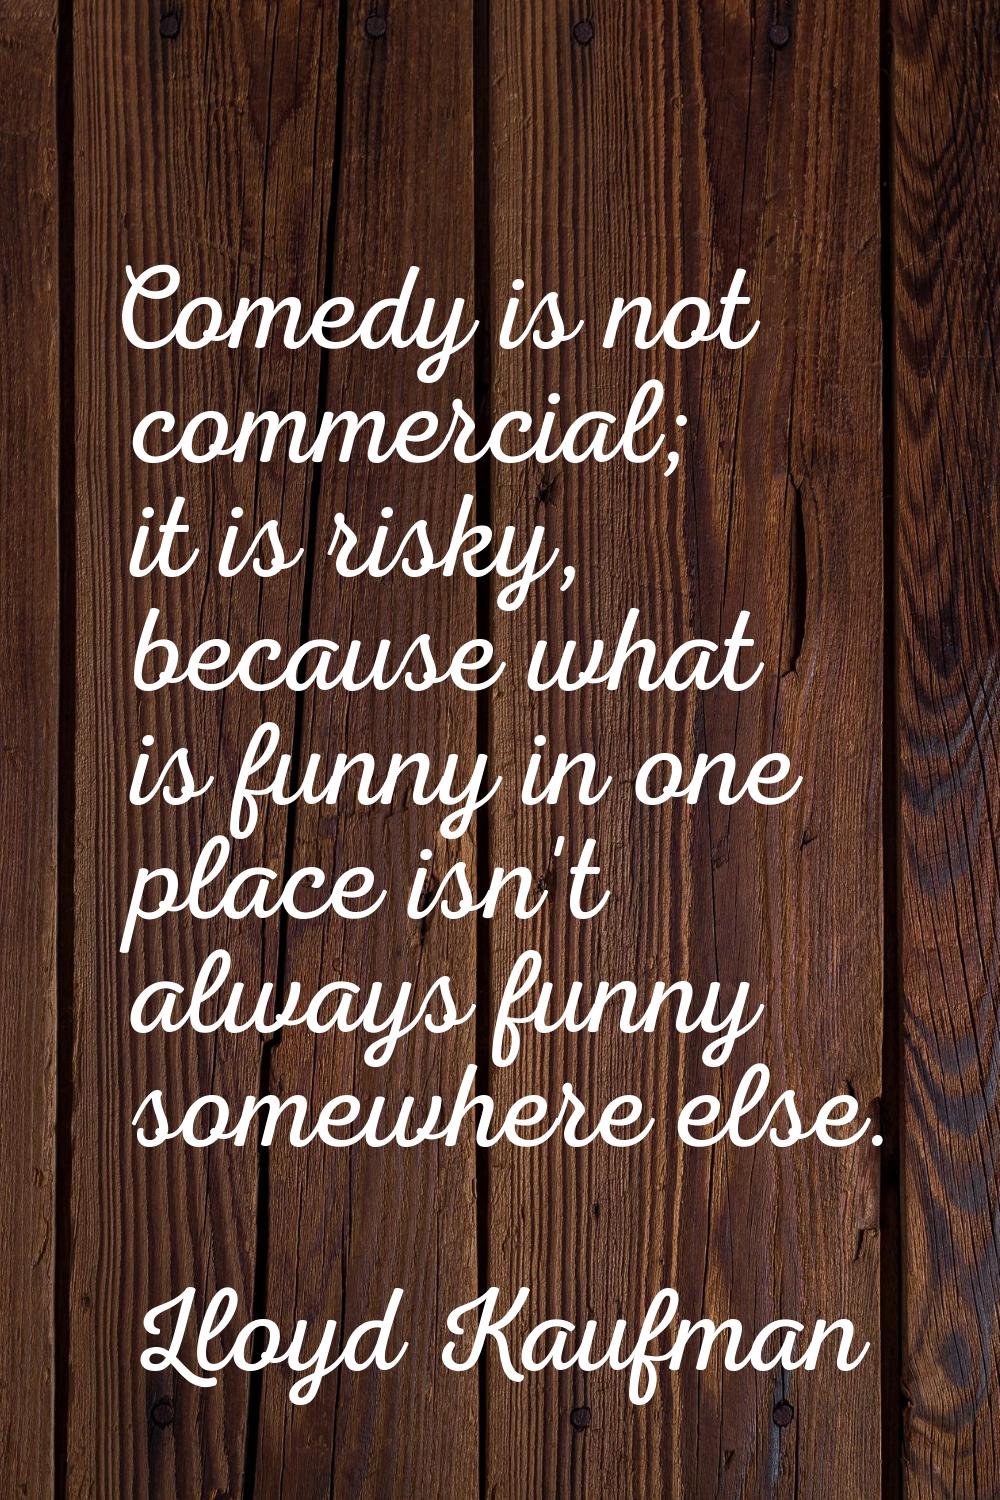 Comedy is not commercial; it is risky, because what is funny in one place isn't always funny somewh